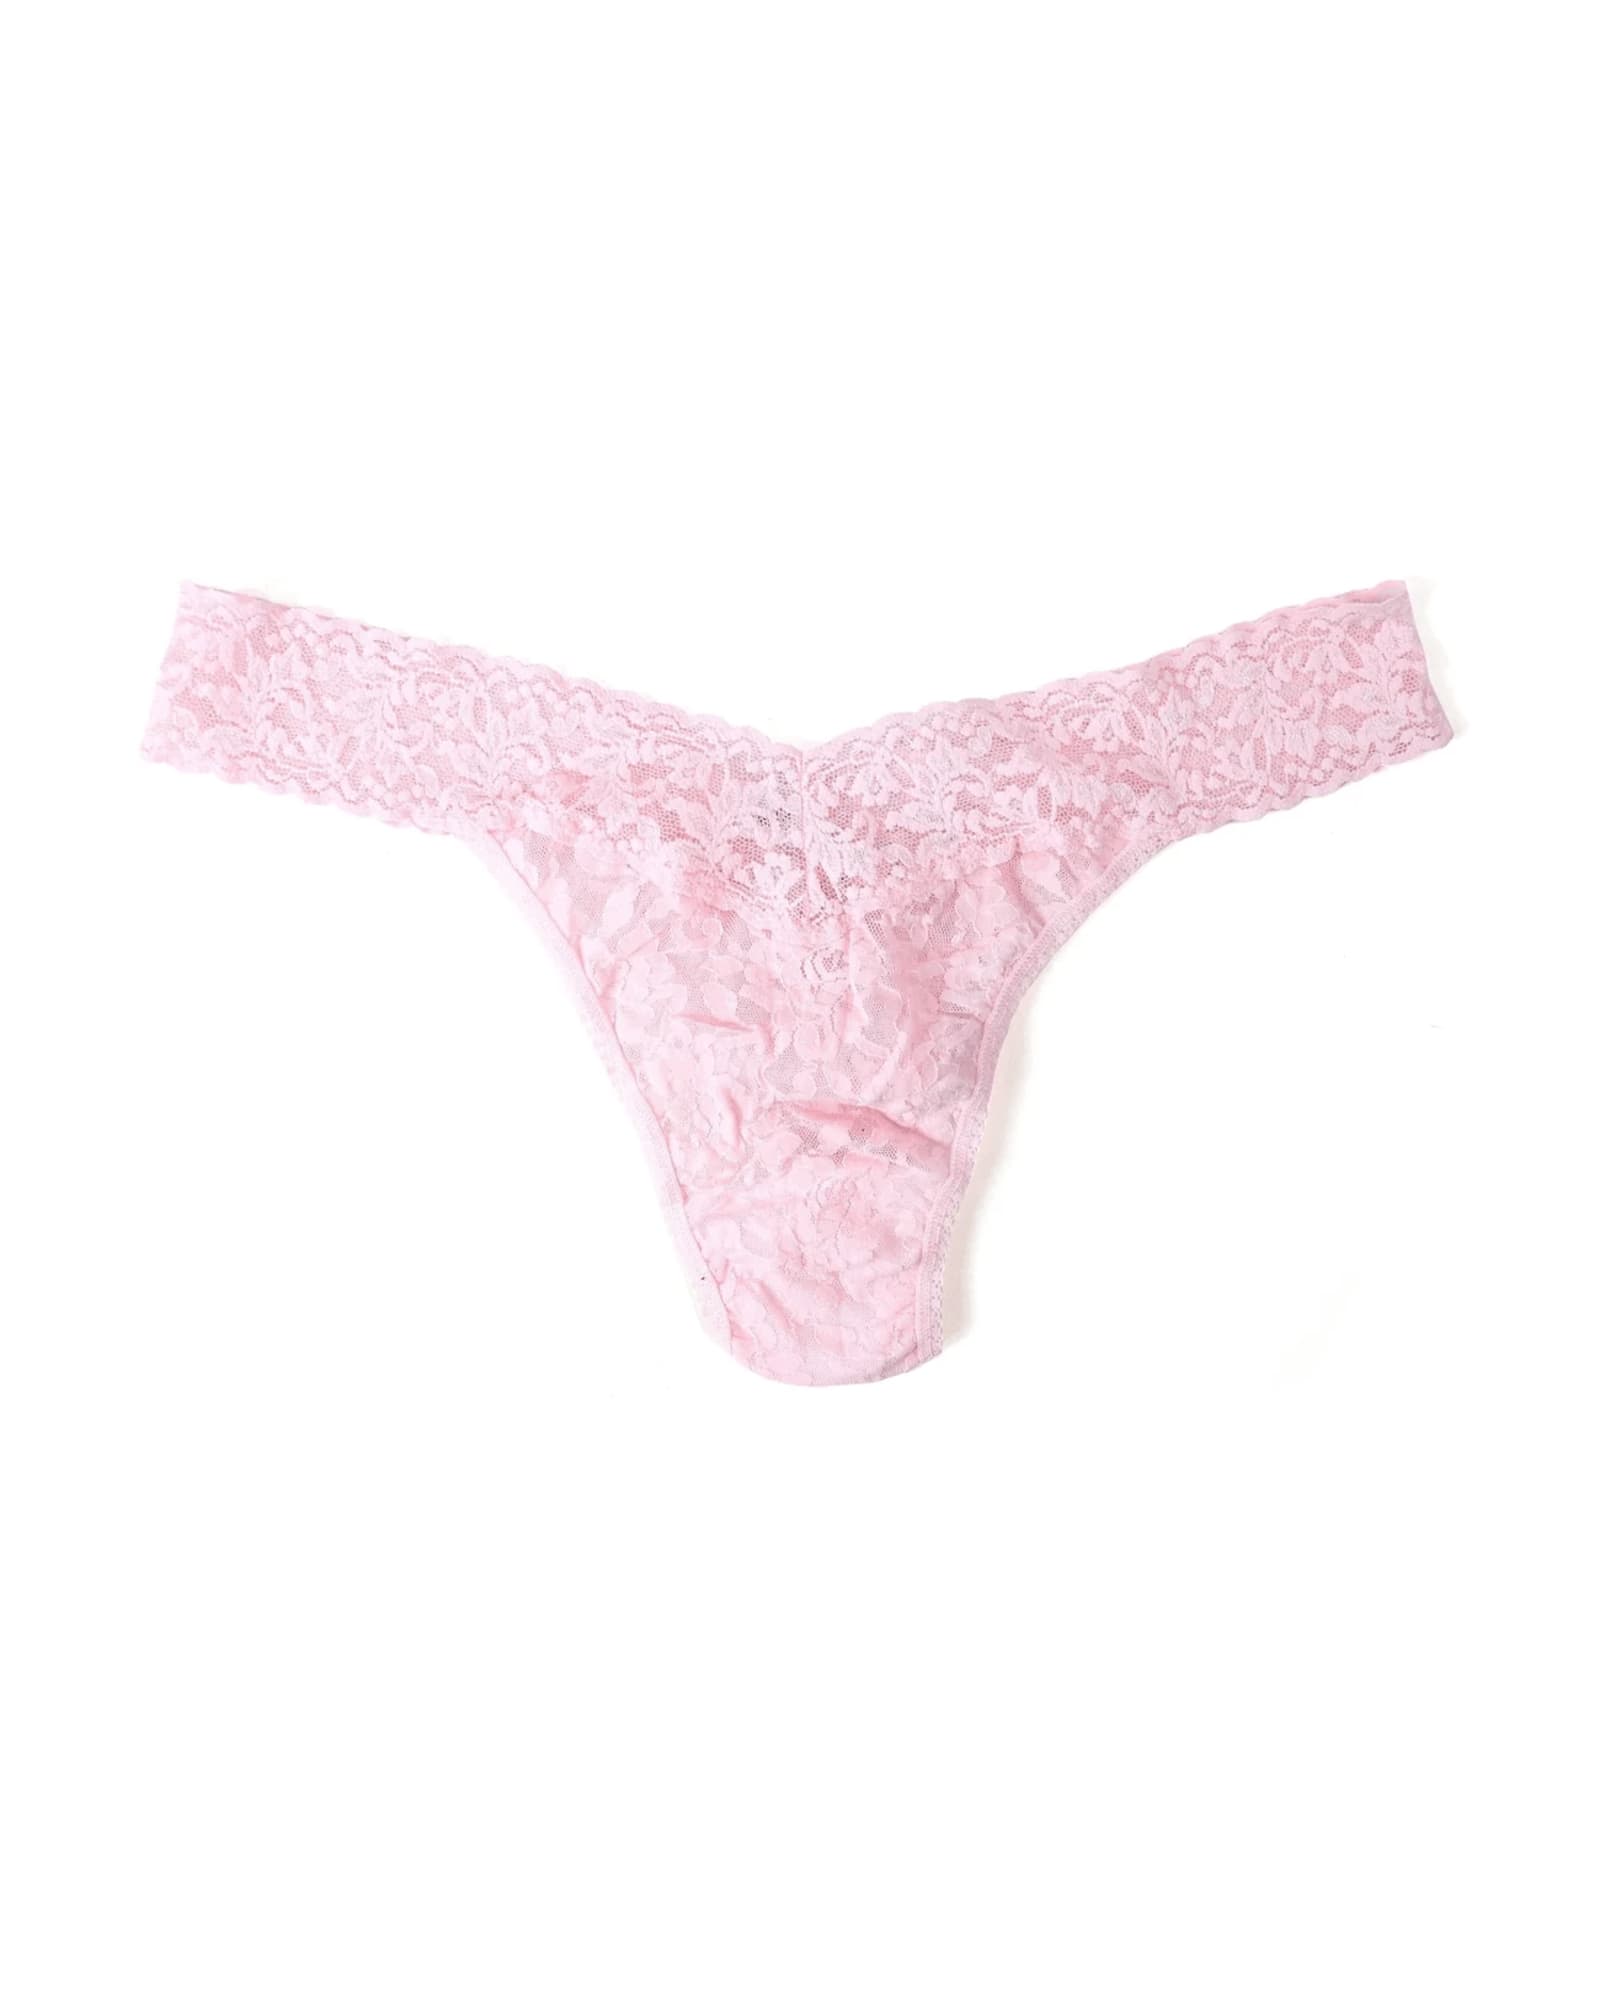 SIGNATURE LACE PLUS THONG | BLIS-BLISS PINK